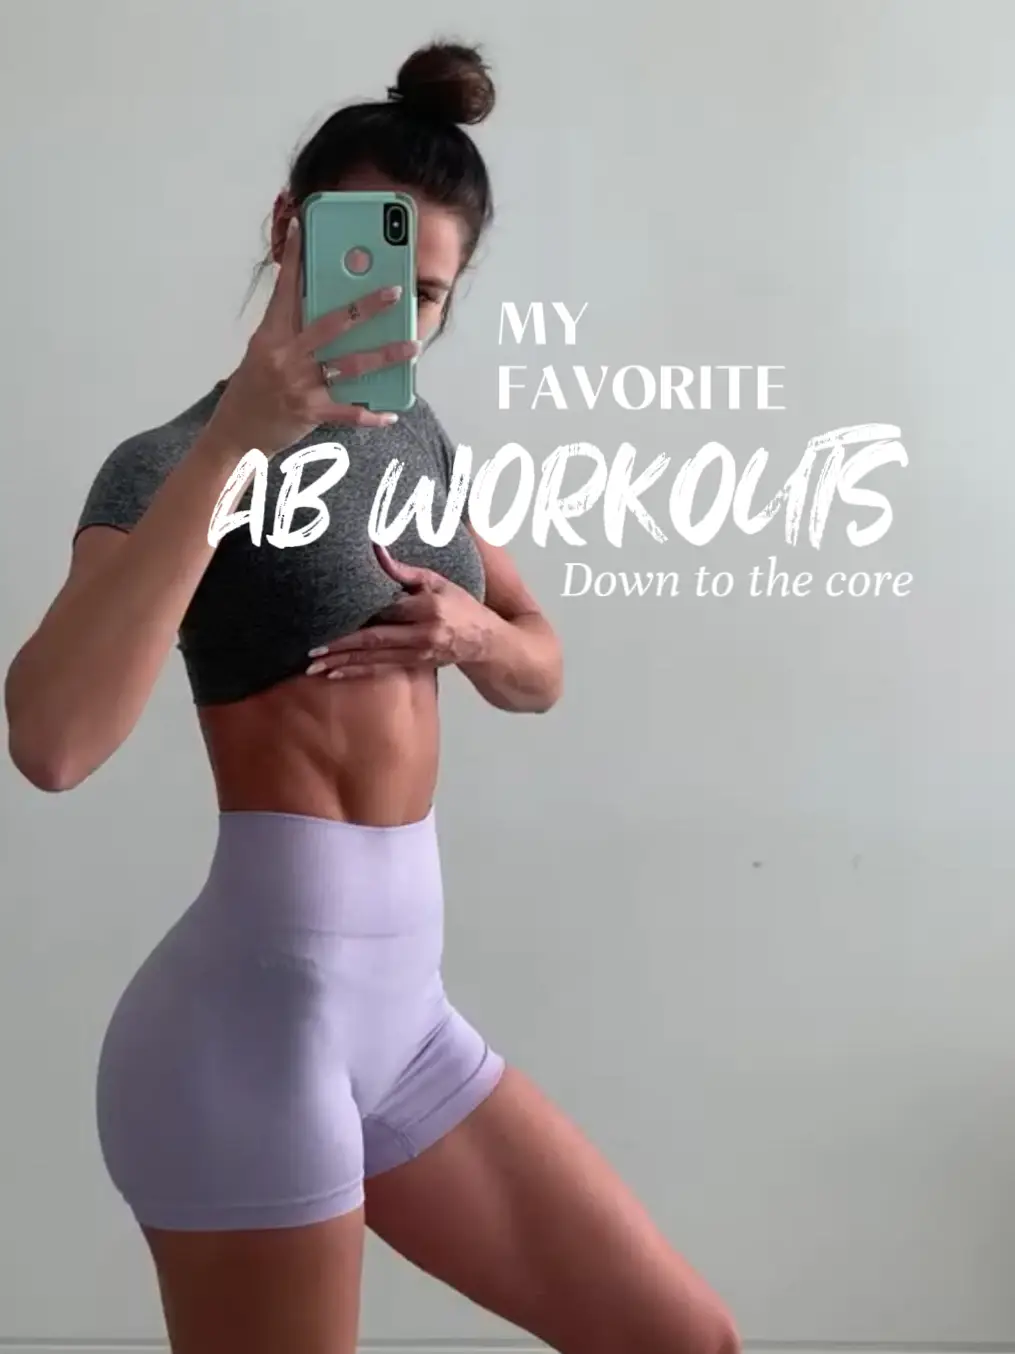 My favorite Ab exercises, Gallery posted by Olivia